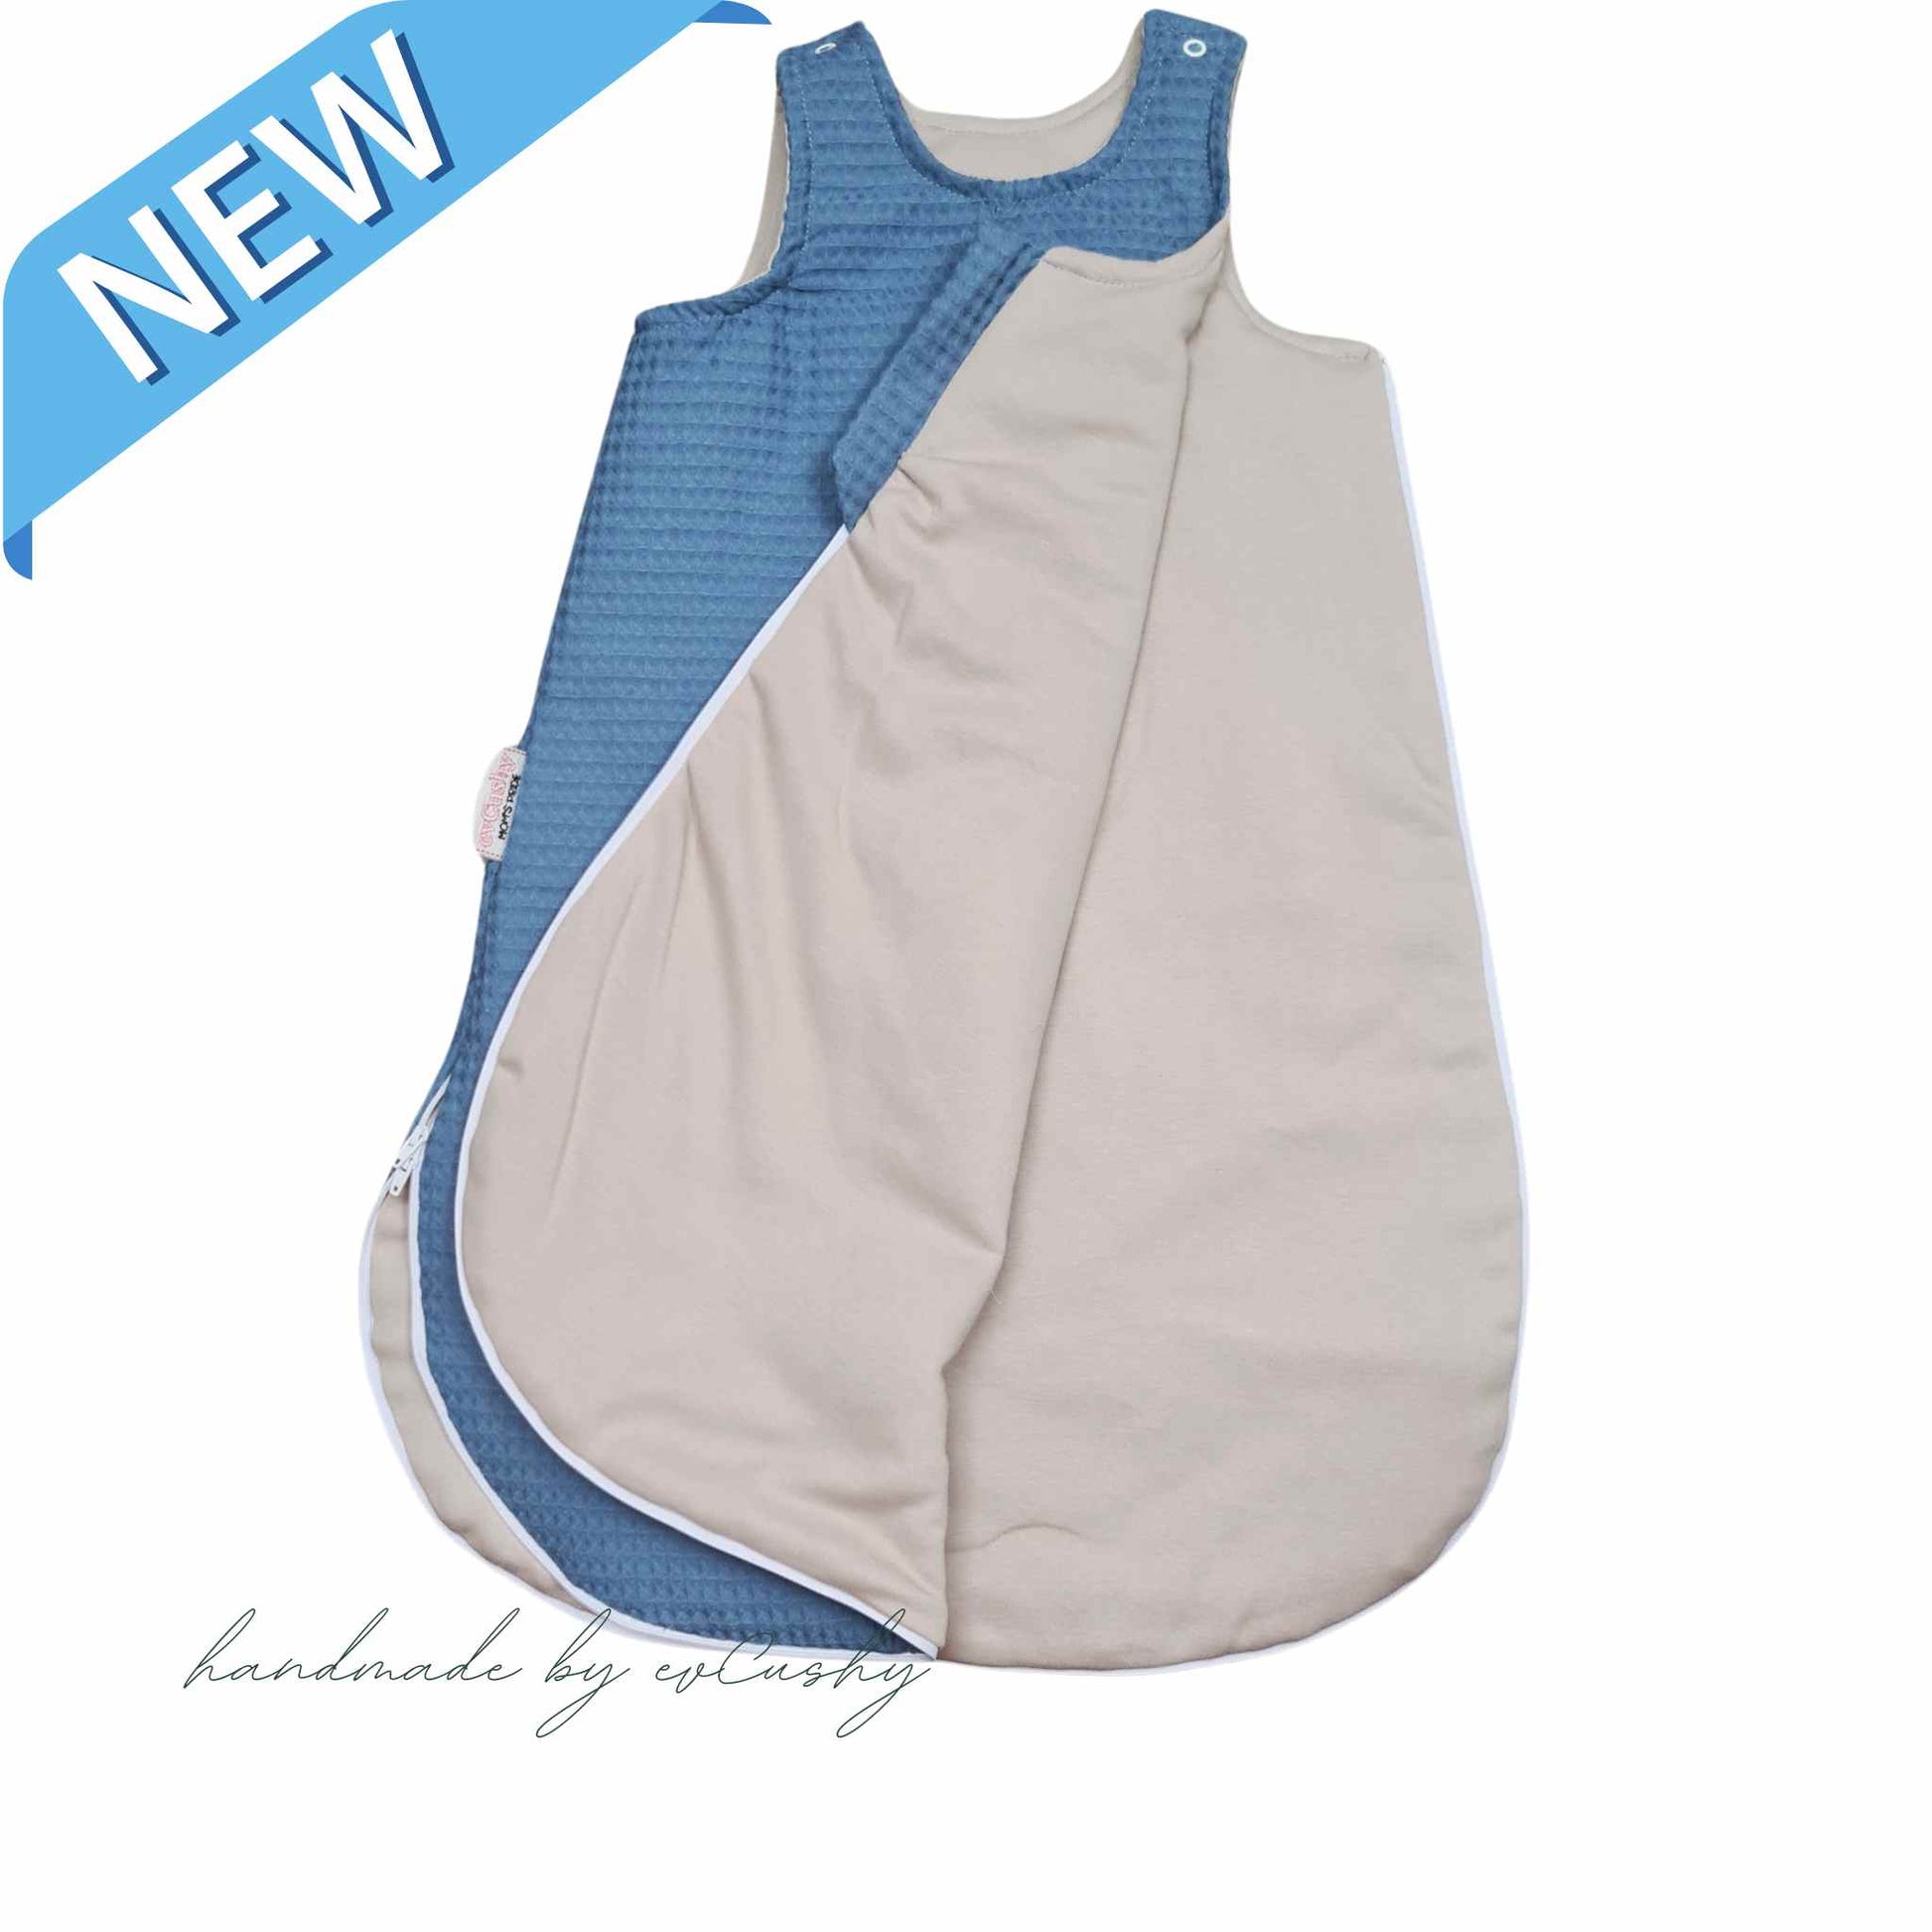 plain sleeping bag for baby jeans blue with beige lining 100% cotton 6-18 months in Ireland